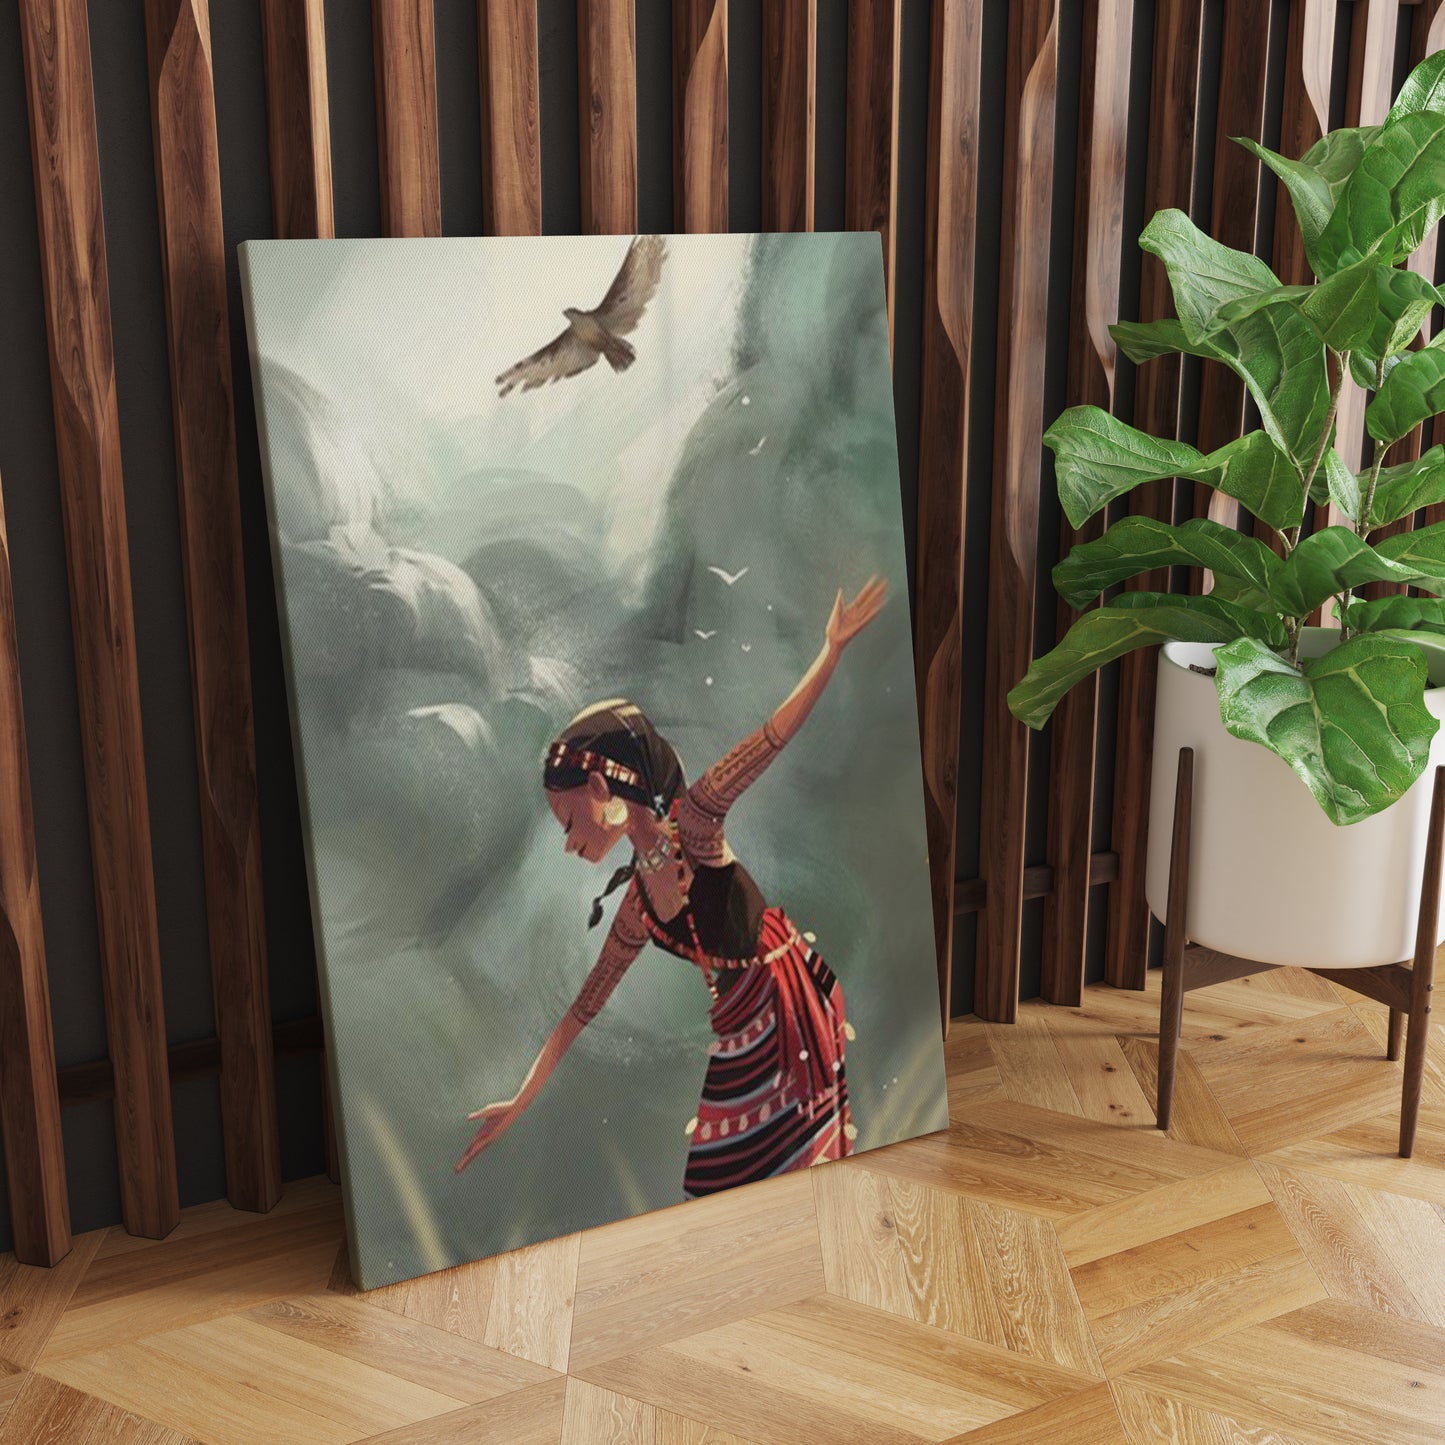 Boundless Freedom: Girl Embracing Nature's Majesty - Inspiring Wall Art Depicting the Joyful Harmony Between a Girl and Majestic Eagles in the Sky - S06E02